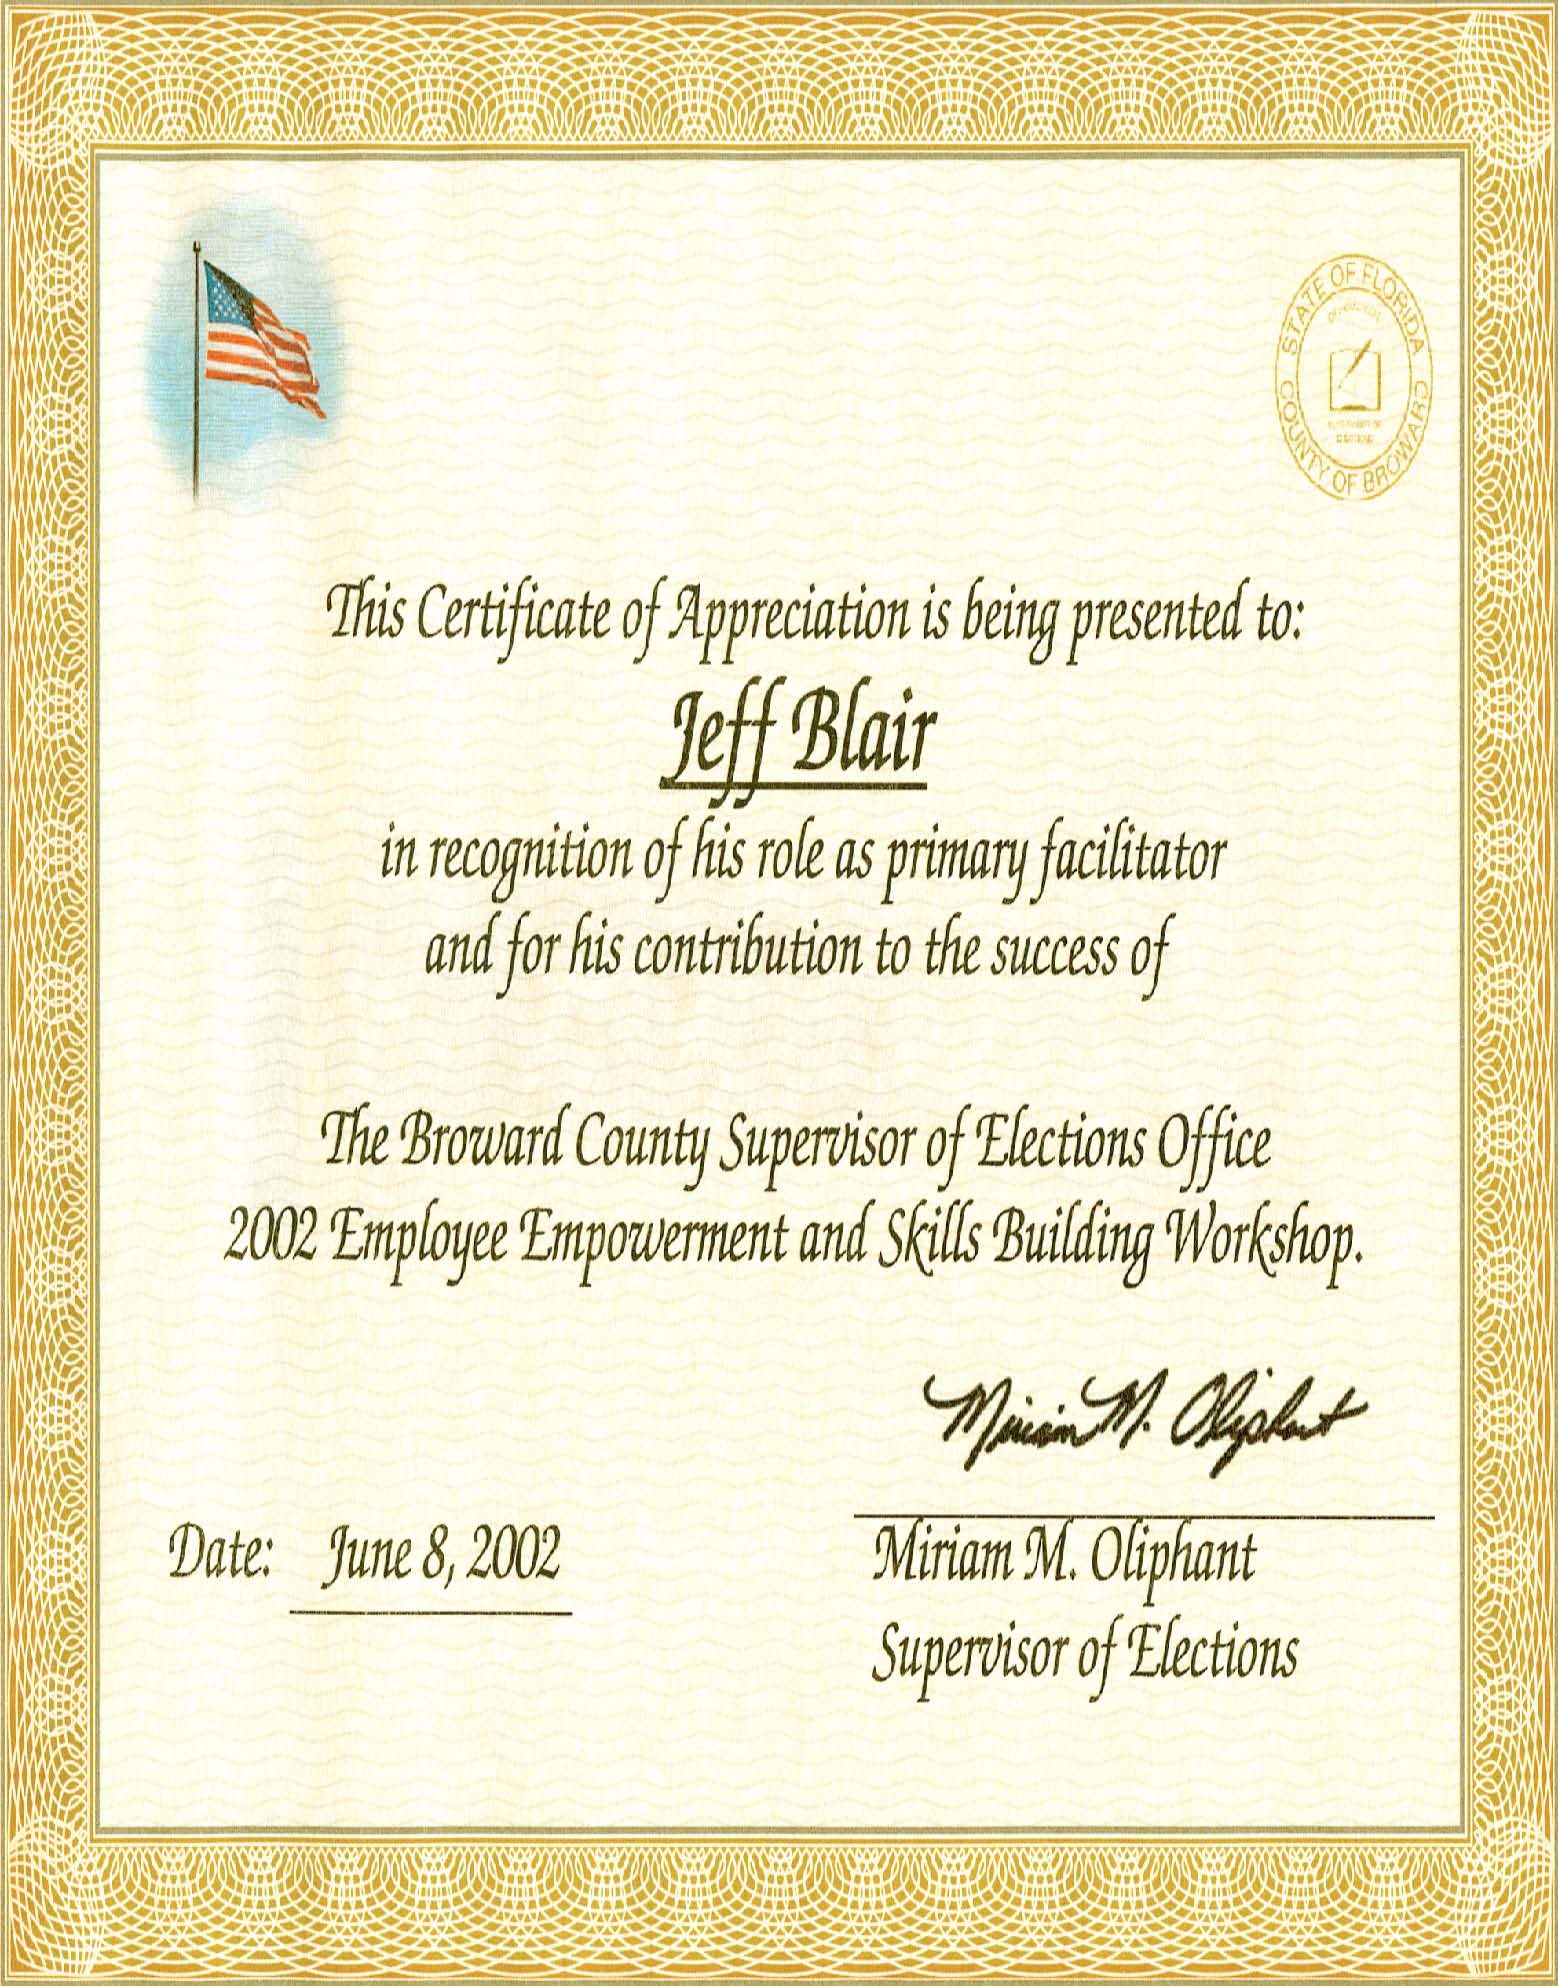 Broward County Supervisor of Elections Certificate of Appreciation